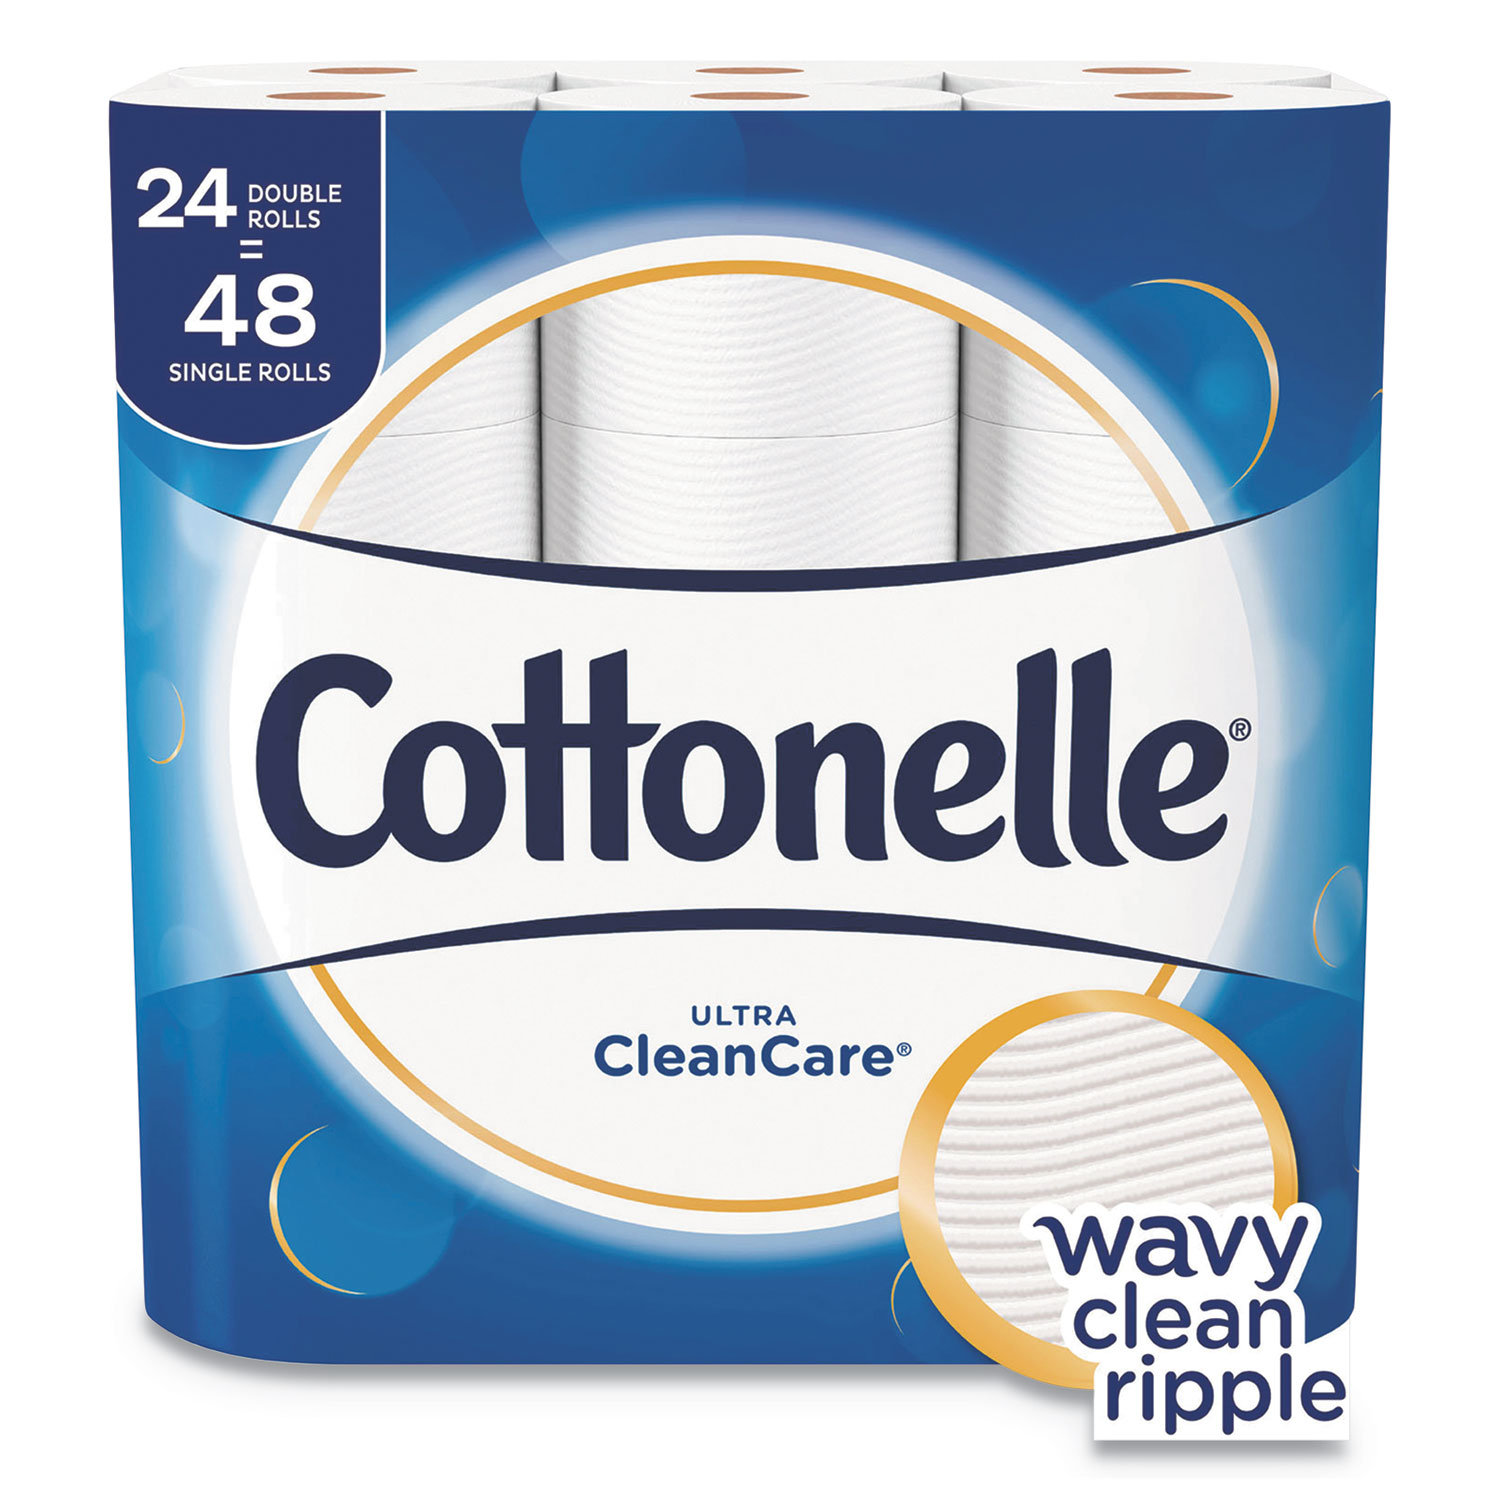  Cottonelle 47766 Ultra CleanCare Toilet Paper, Strong Tissue, Septic Safe, 1 Ply, White, 170 Sheets/Roll, 24 Rolls/Pack, 2 Packs/Carton (KCC47766) 